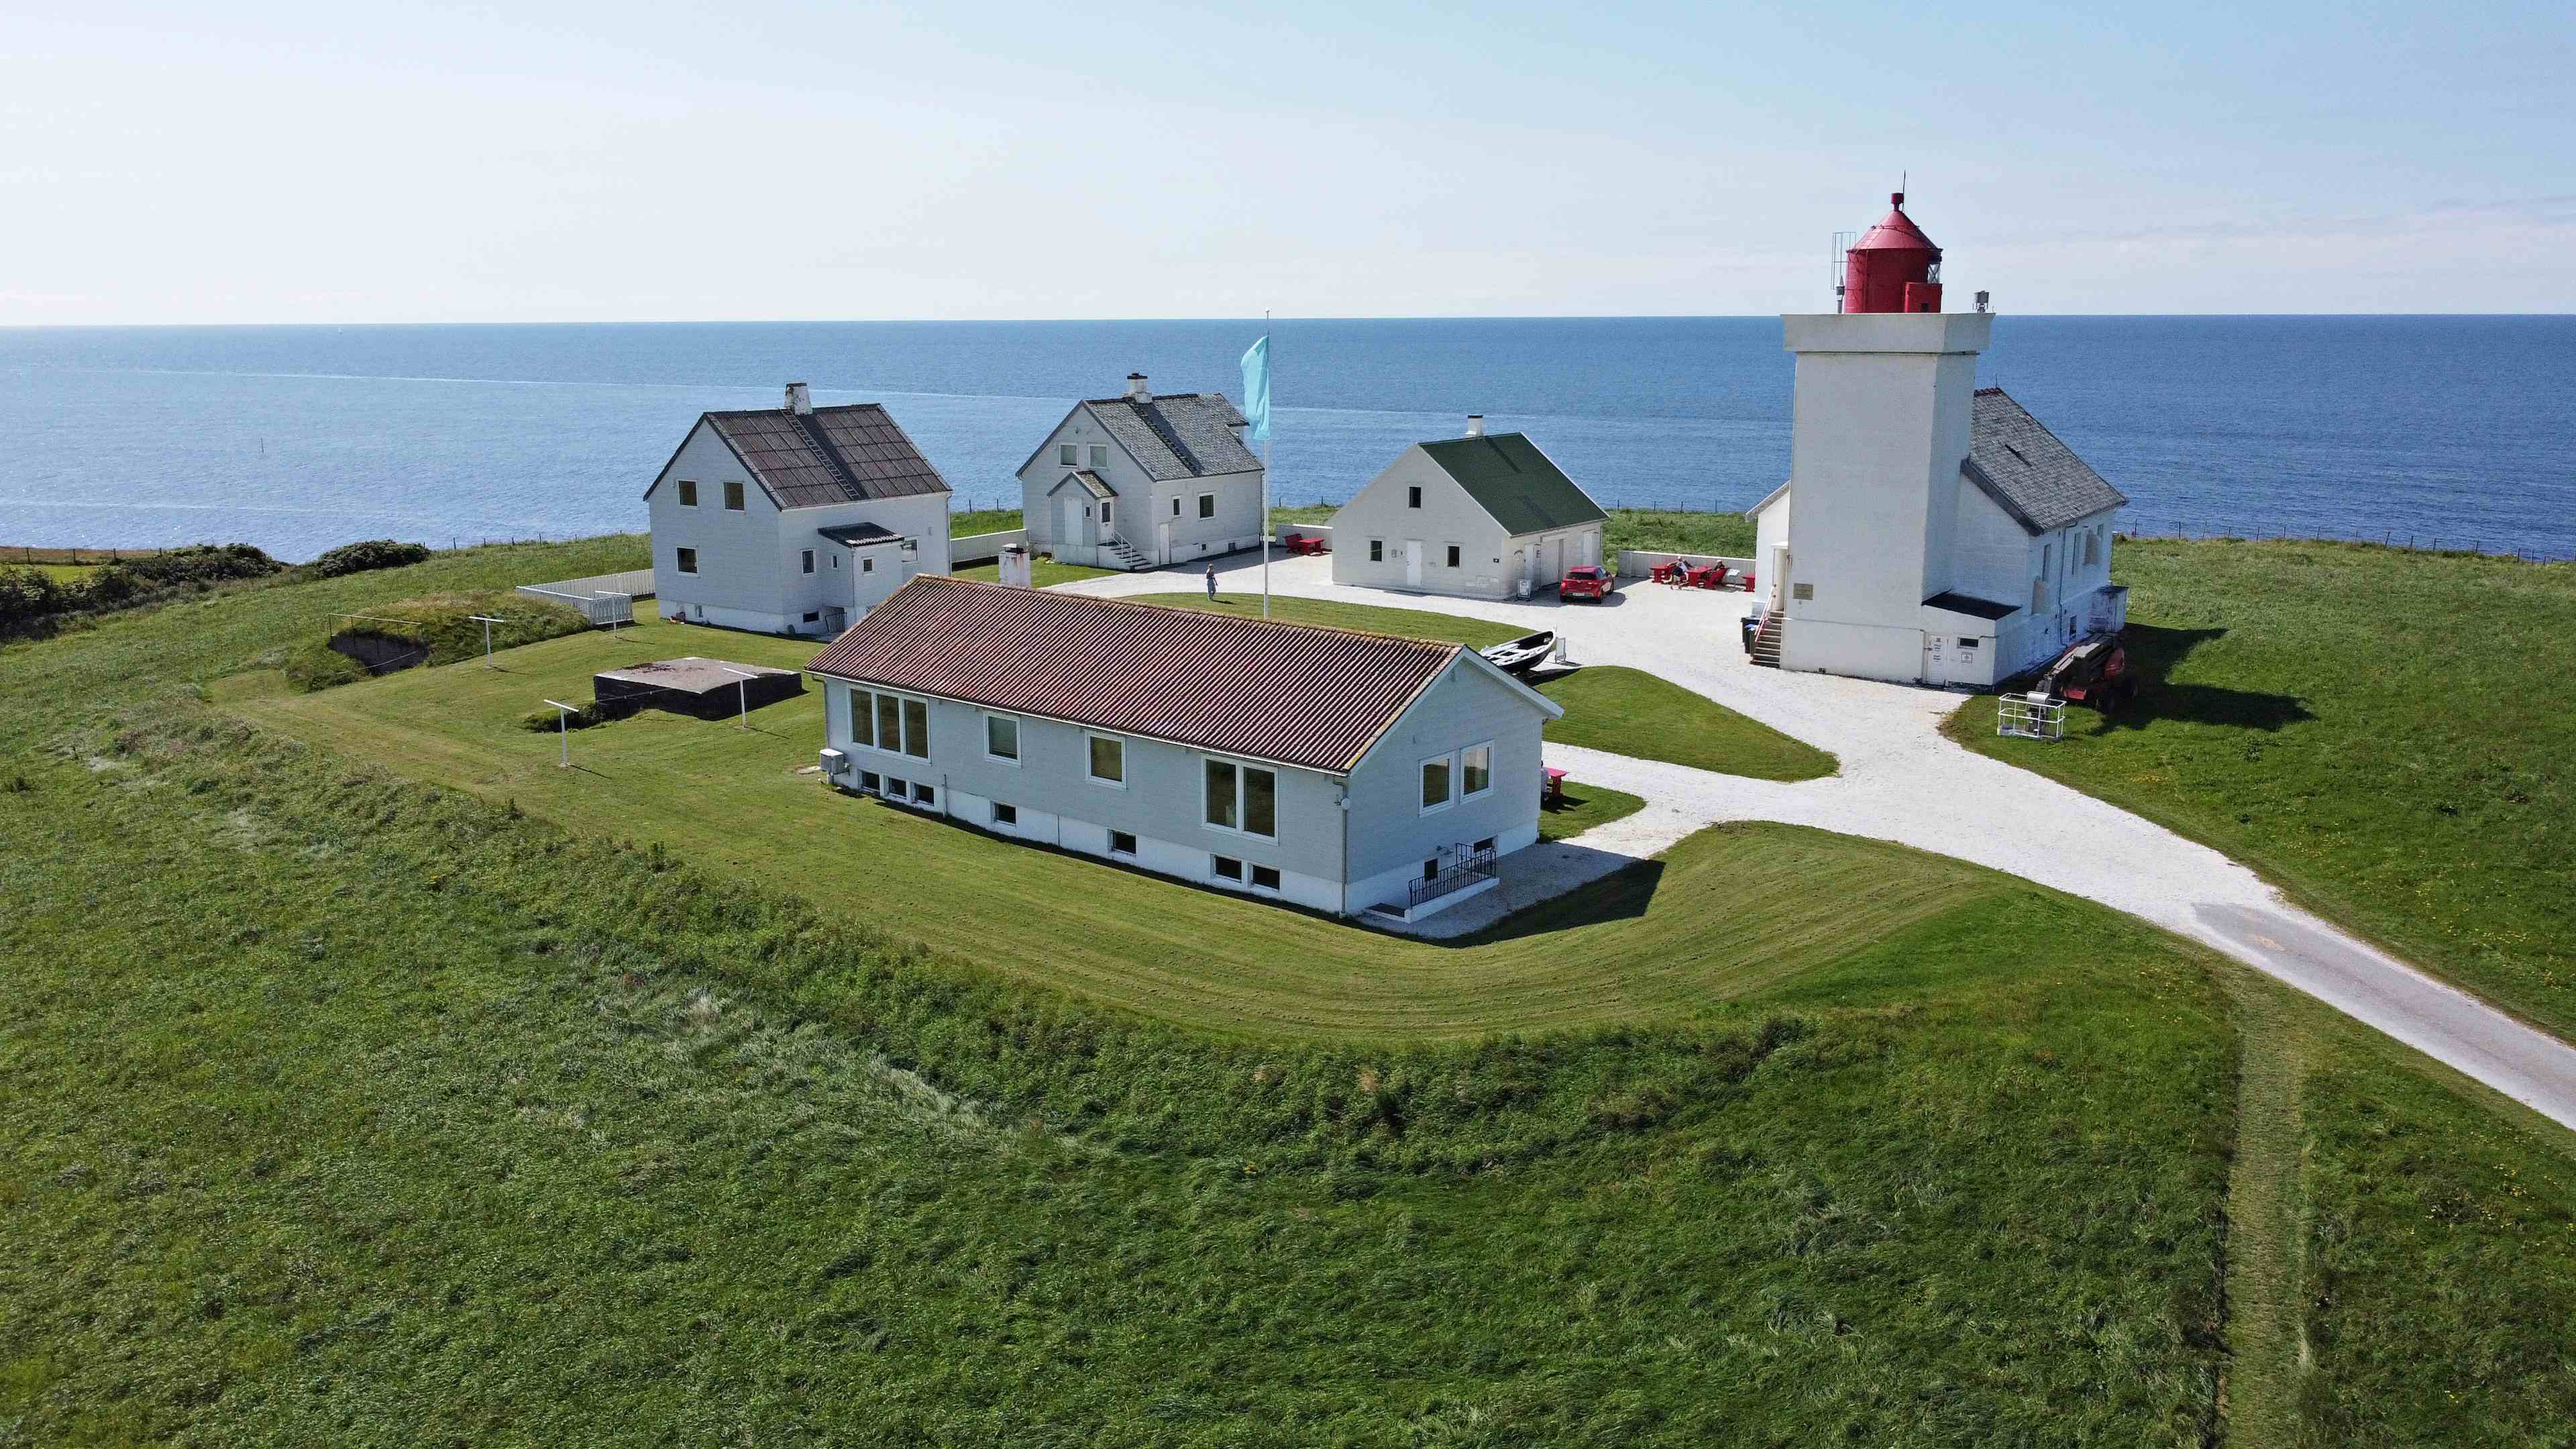 Obrestad lighthouse with all buildings taken from above. The sea and green fields surrounding the lighthouse.